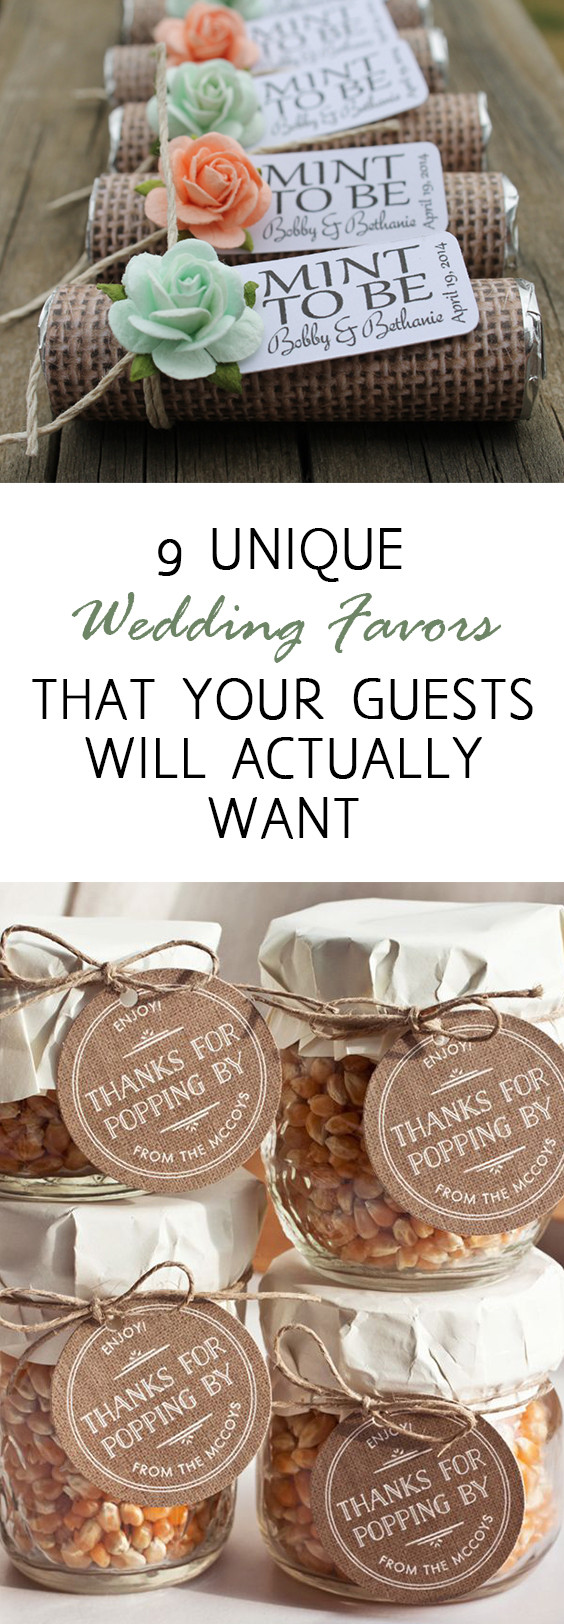 Wedding Favors Cheap
 9 Unique Wedding Favors that Your Guests Will Actually